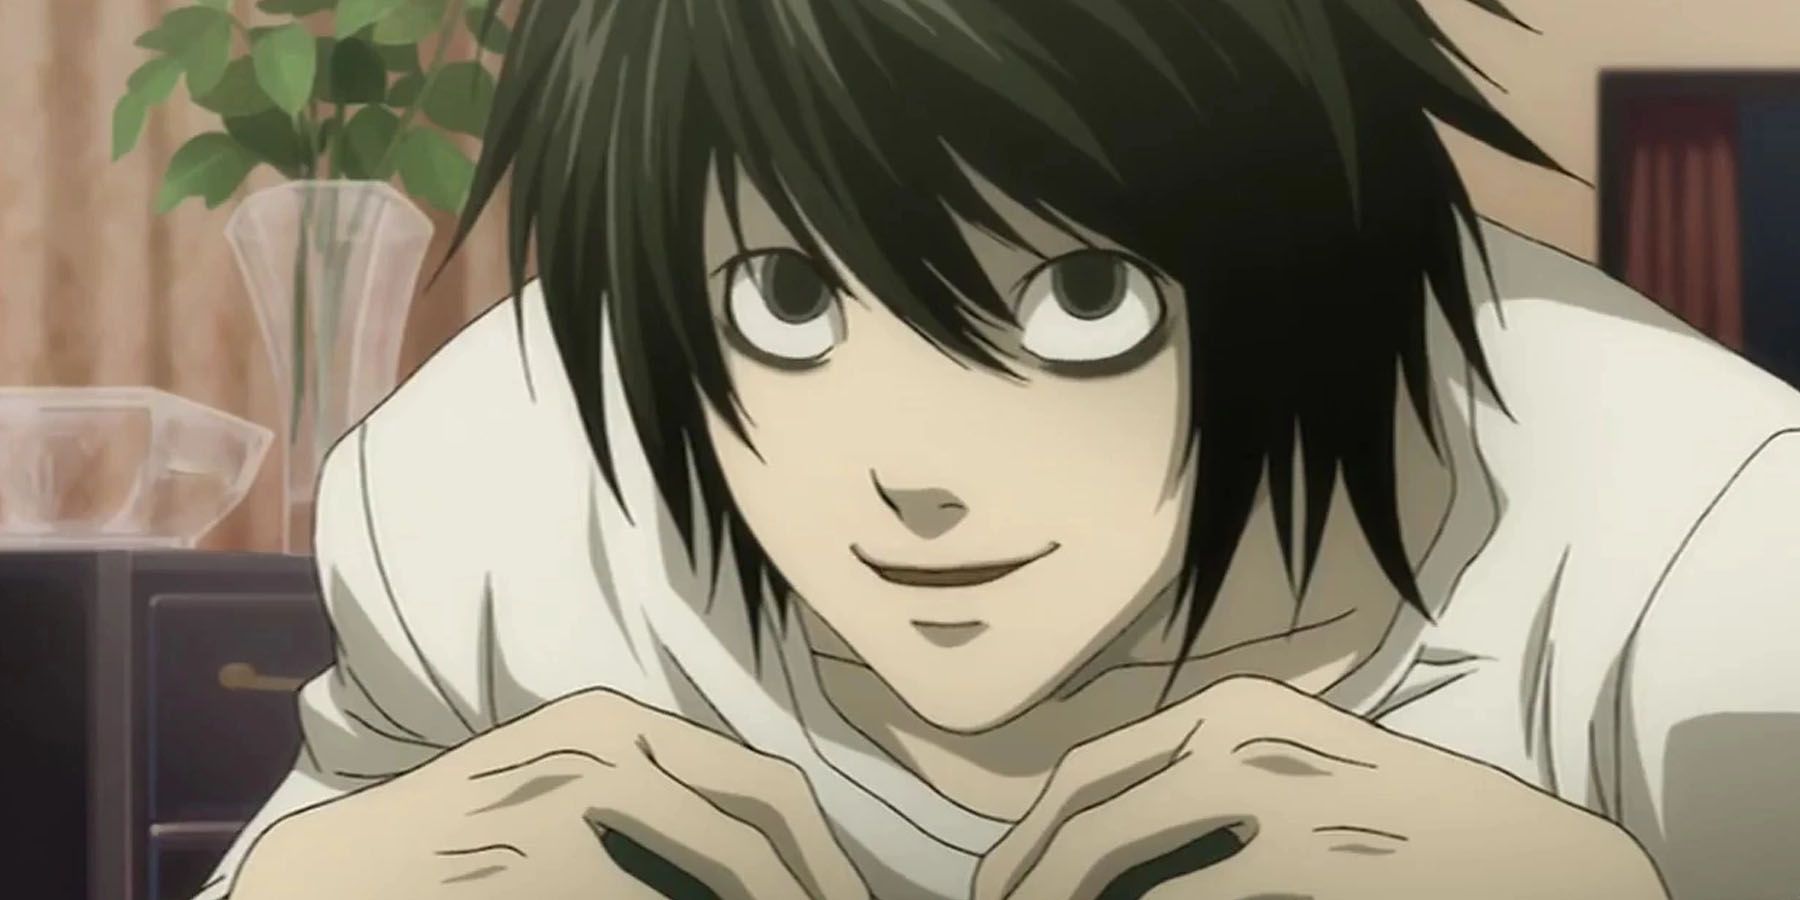 L of Death Note